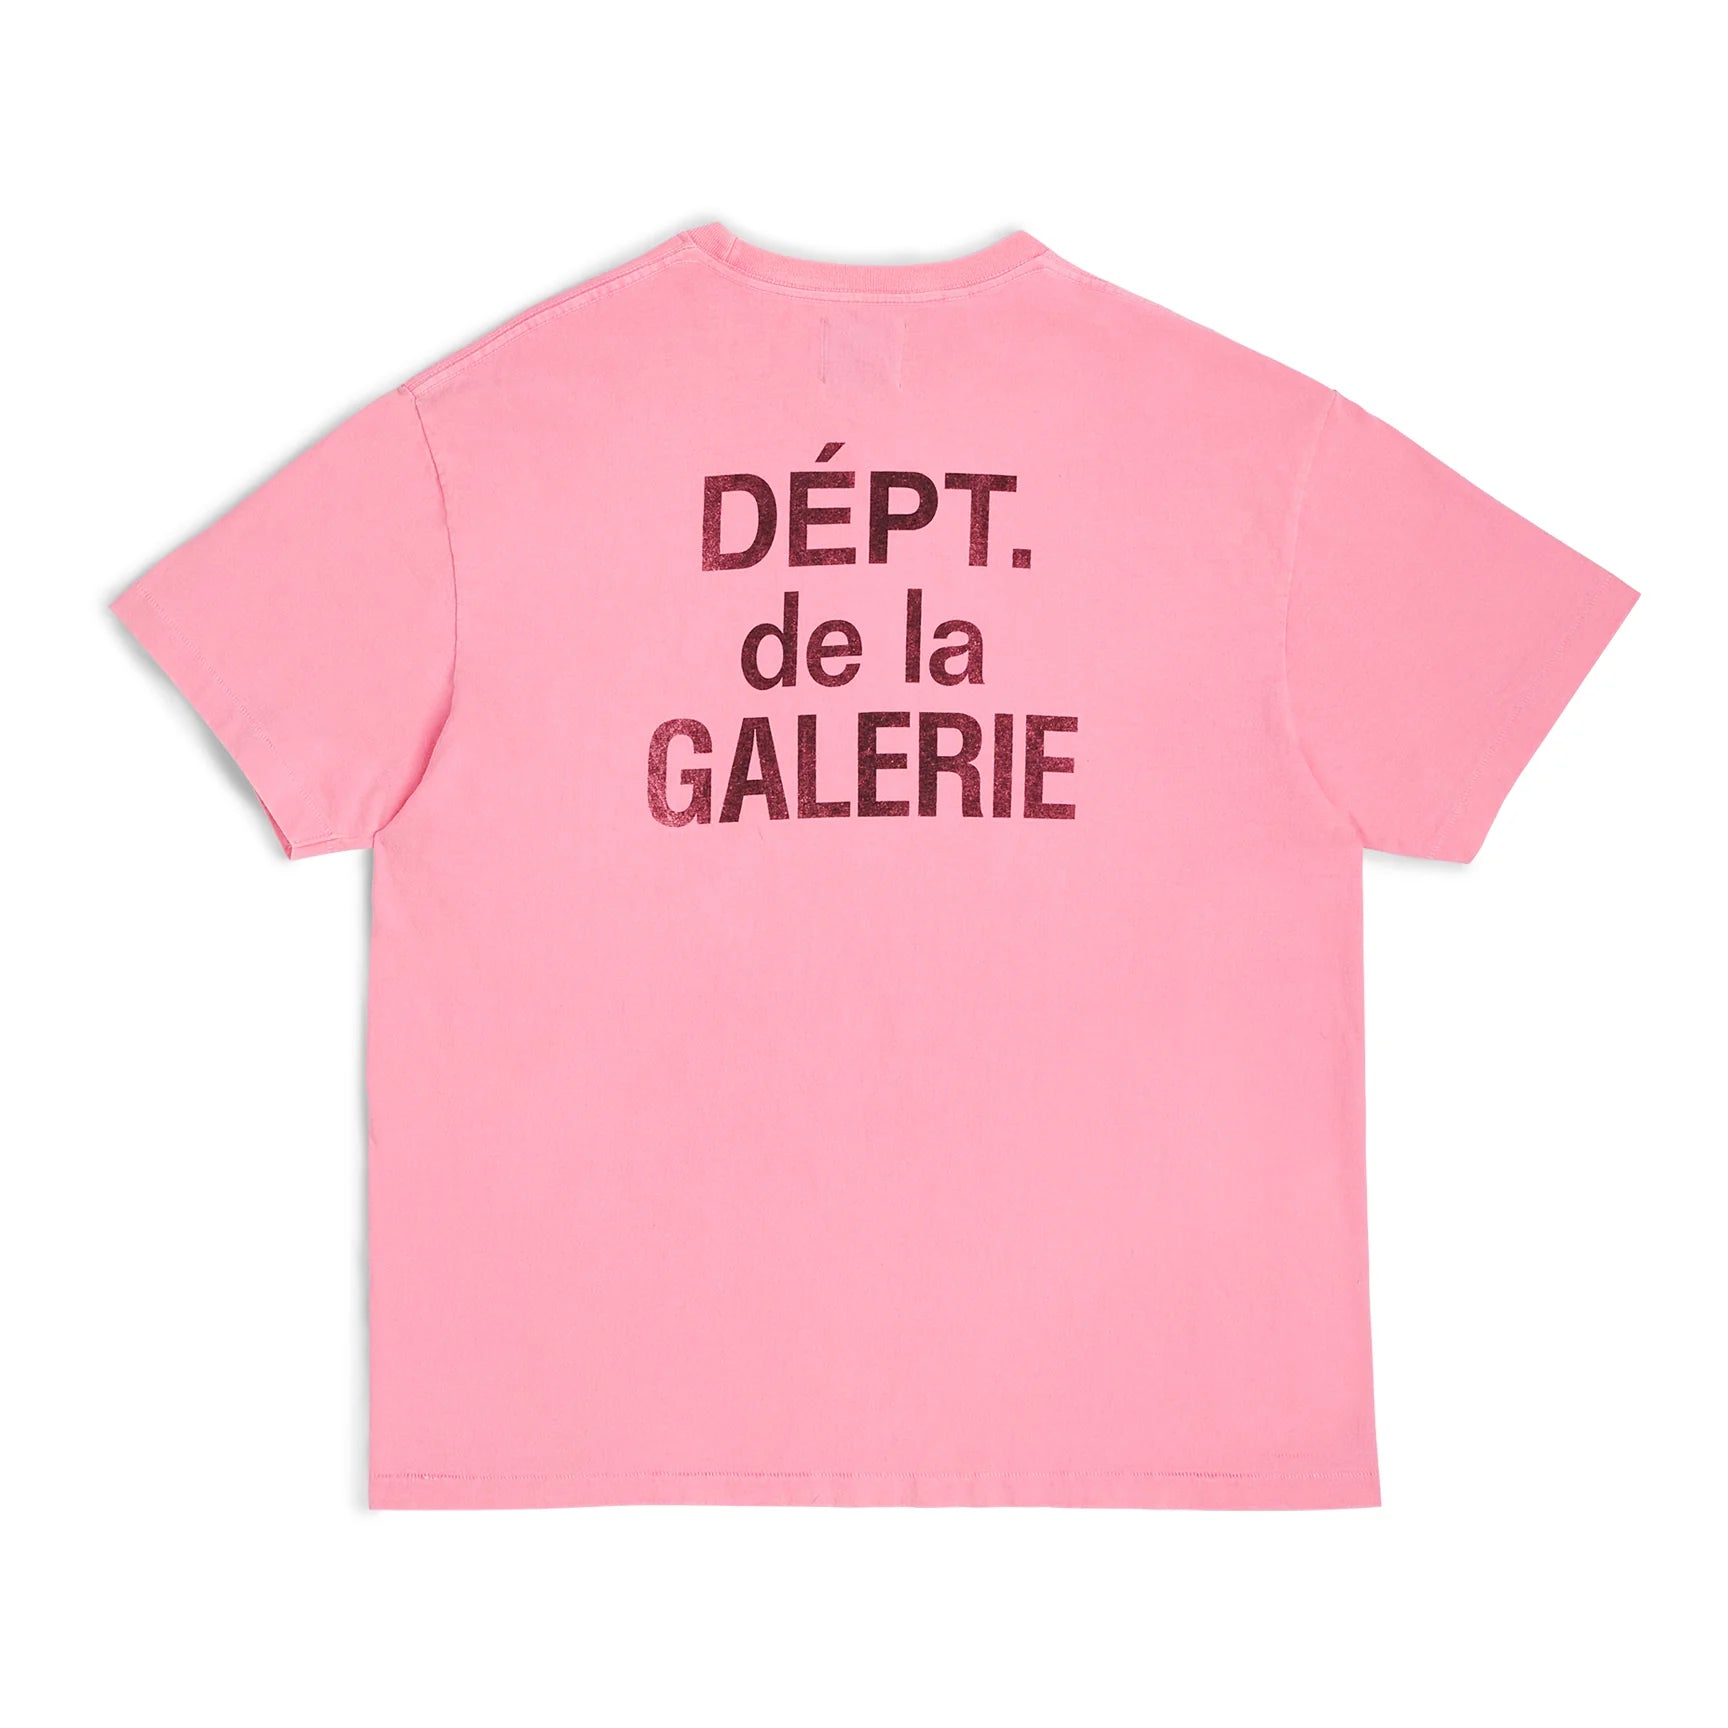 Gallery Dept. French T-Shirt Neon Pink